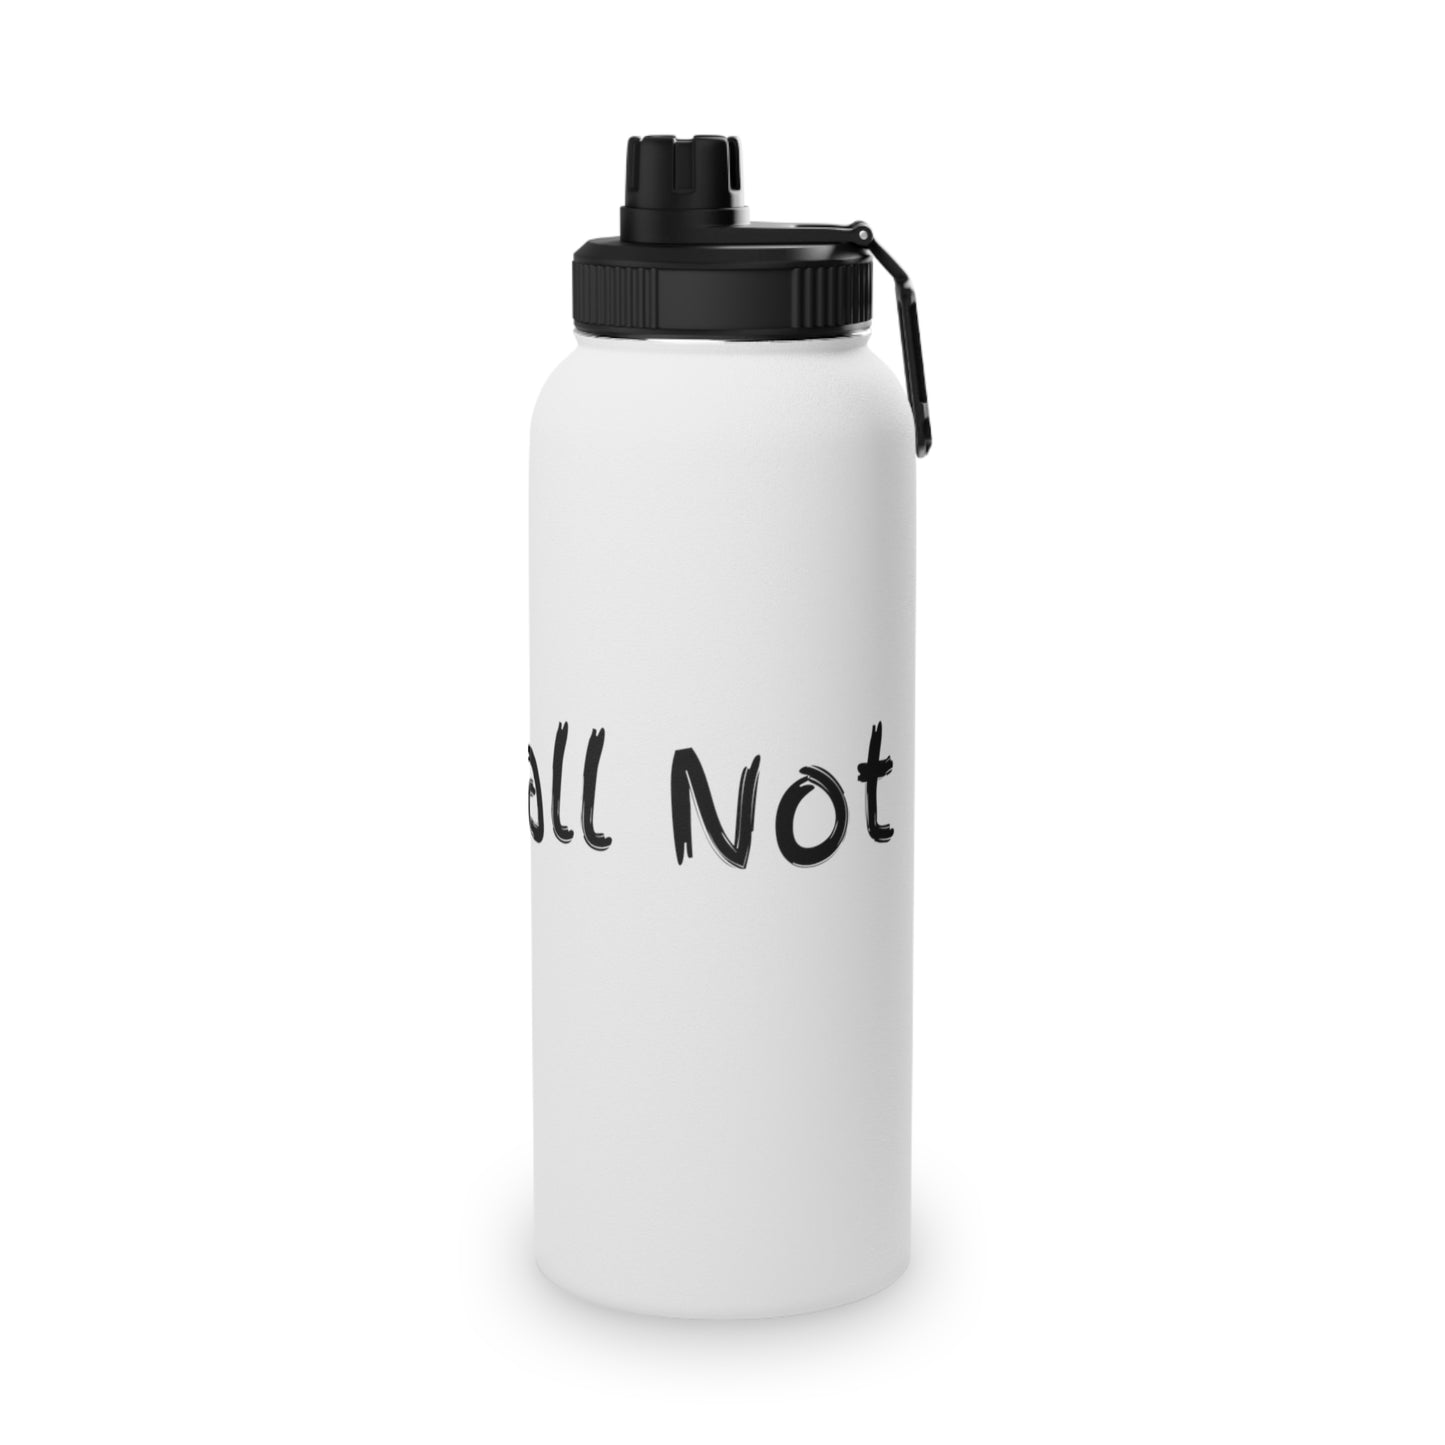 Shall Not - Stainless Steel Water Bottle, Sports Lid